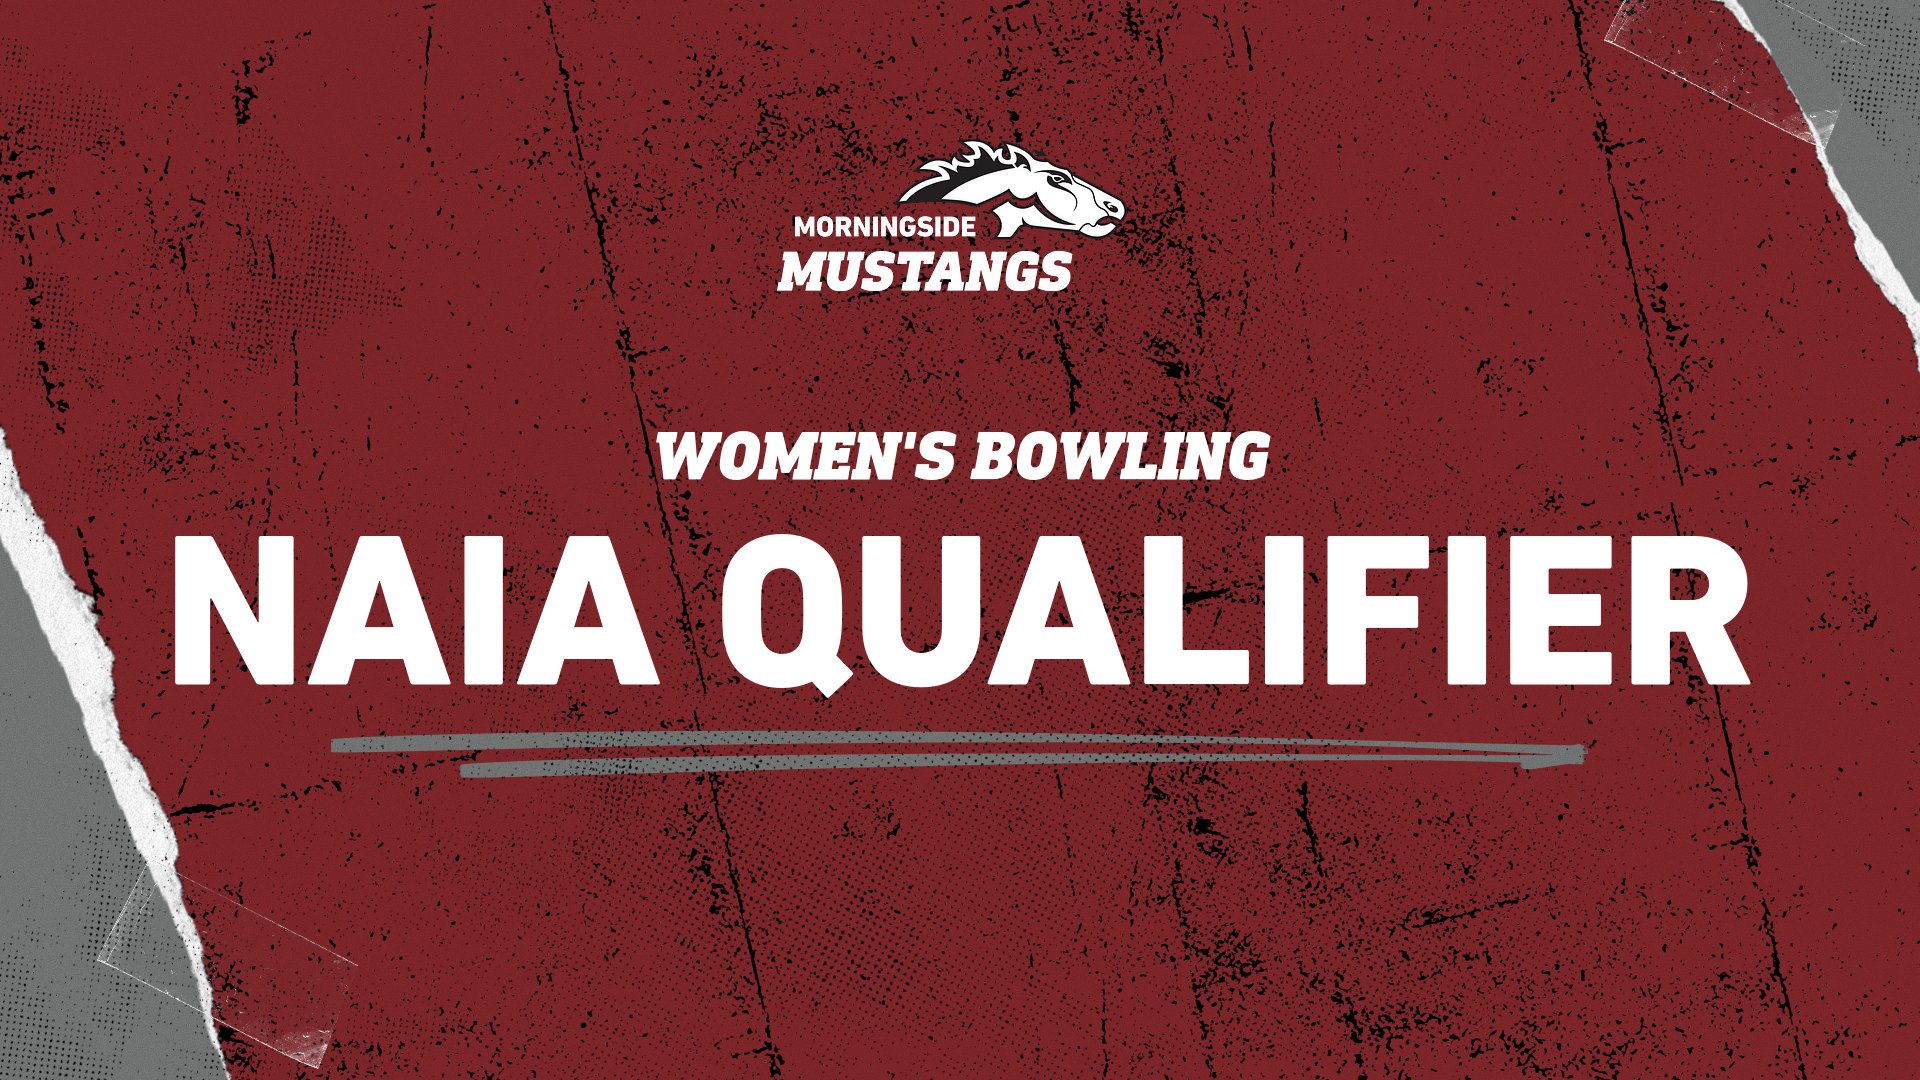 Mustangs fall to eventual champion at NAIA unaffiliated qualifier